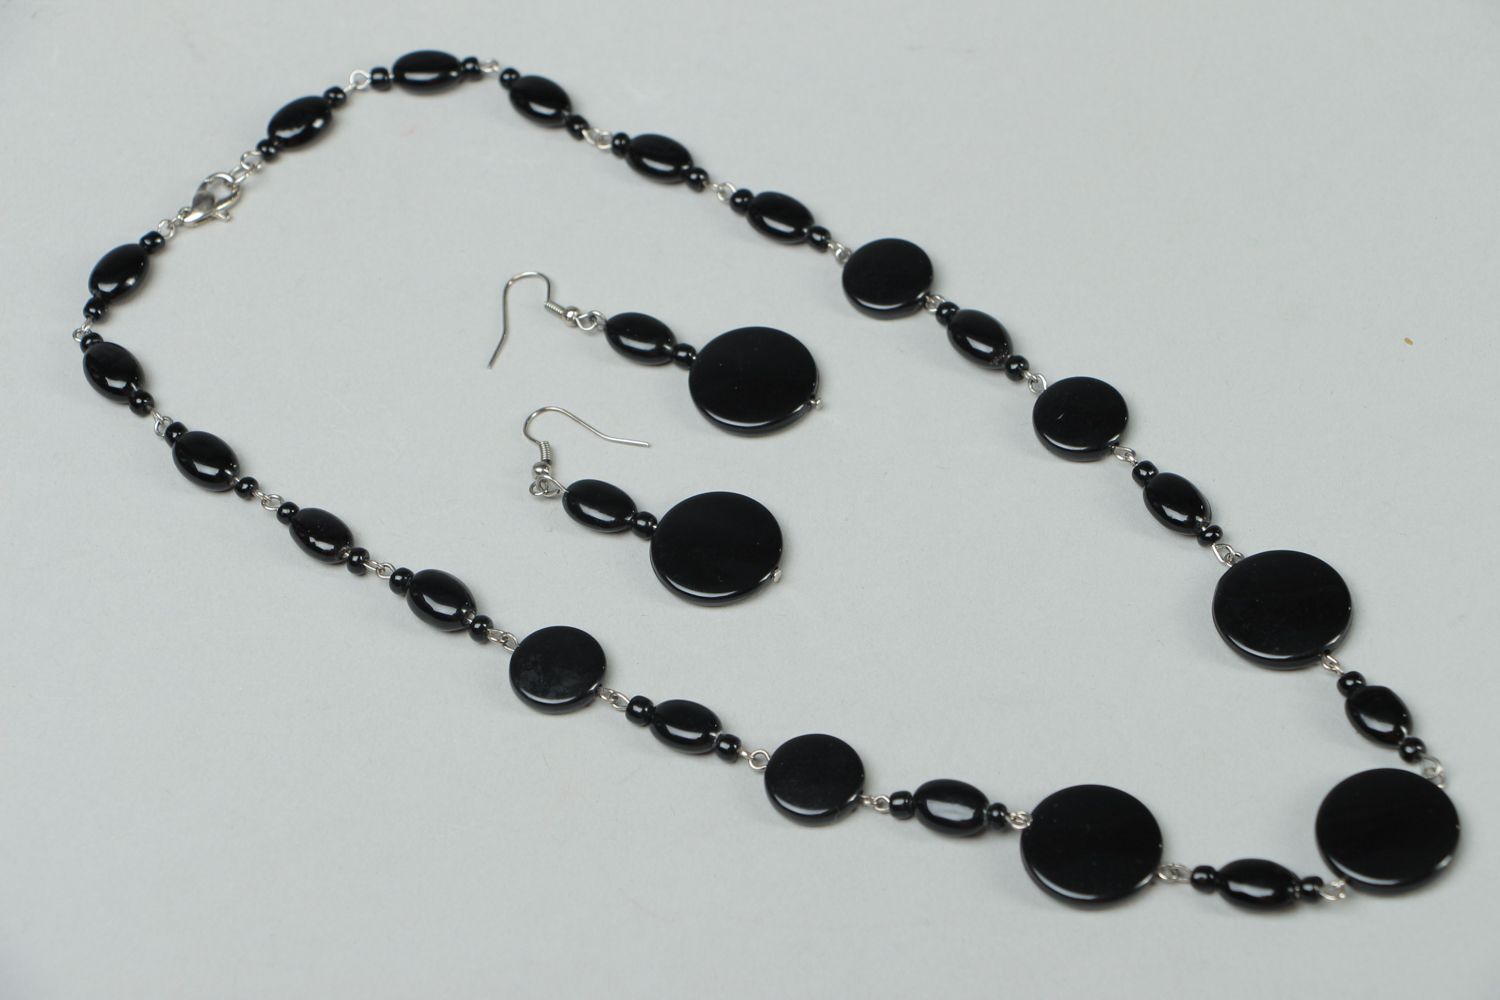 Black plastic jewelry earrings and bead necklace photo 1